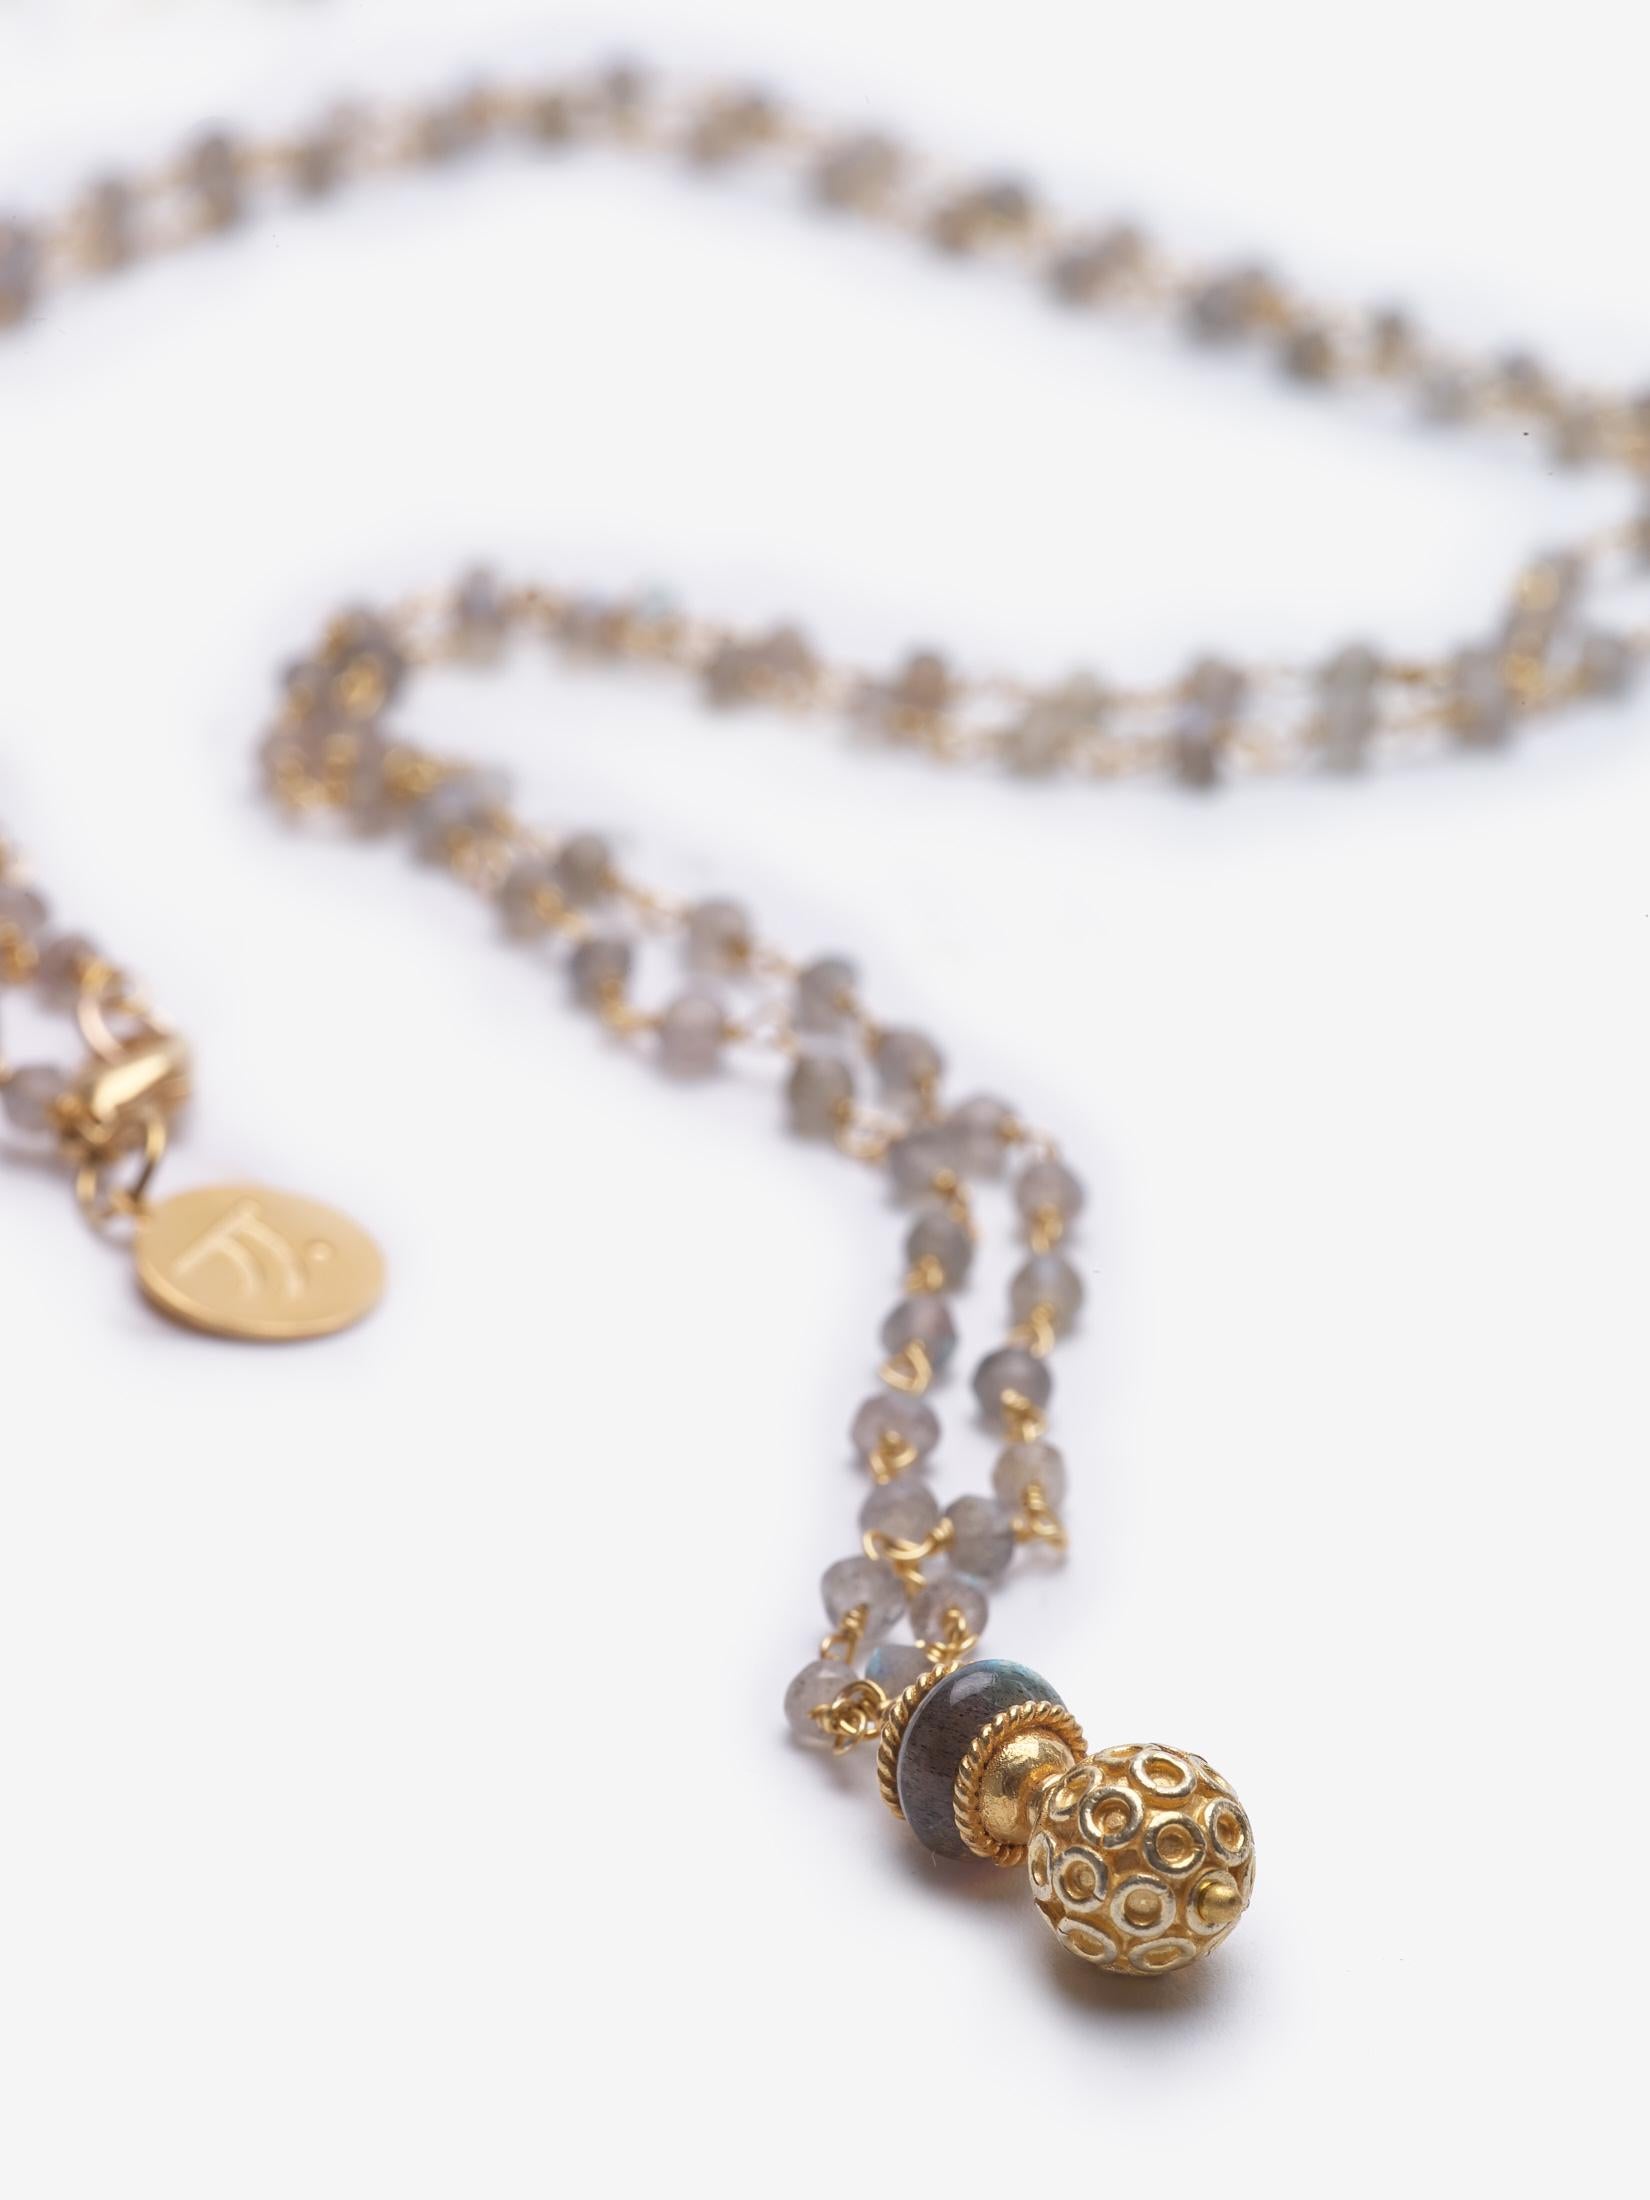 Story Behind the Jewelry
The necklace is symbolic of the pagodas which pepper the landscapes of South East Asia.  The necklace is comprised of a beautiful labradorite 14K gold filled gemstone chain.

Properties
Labradorite is a transformational